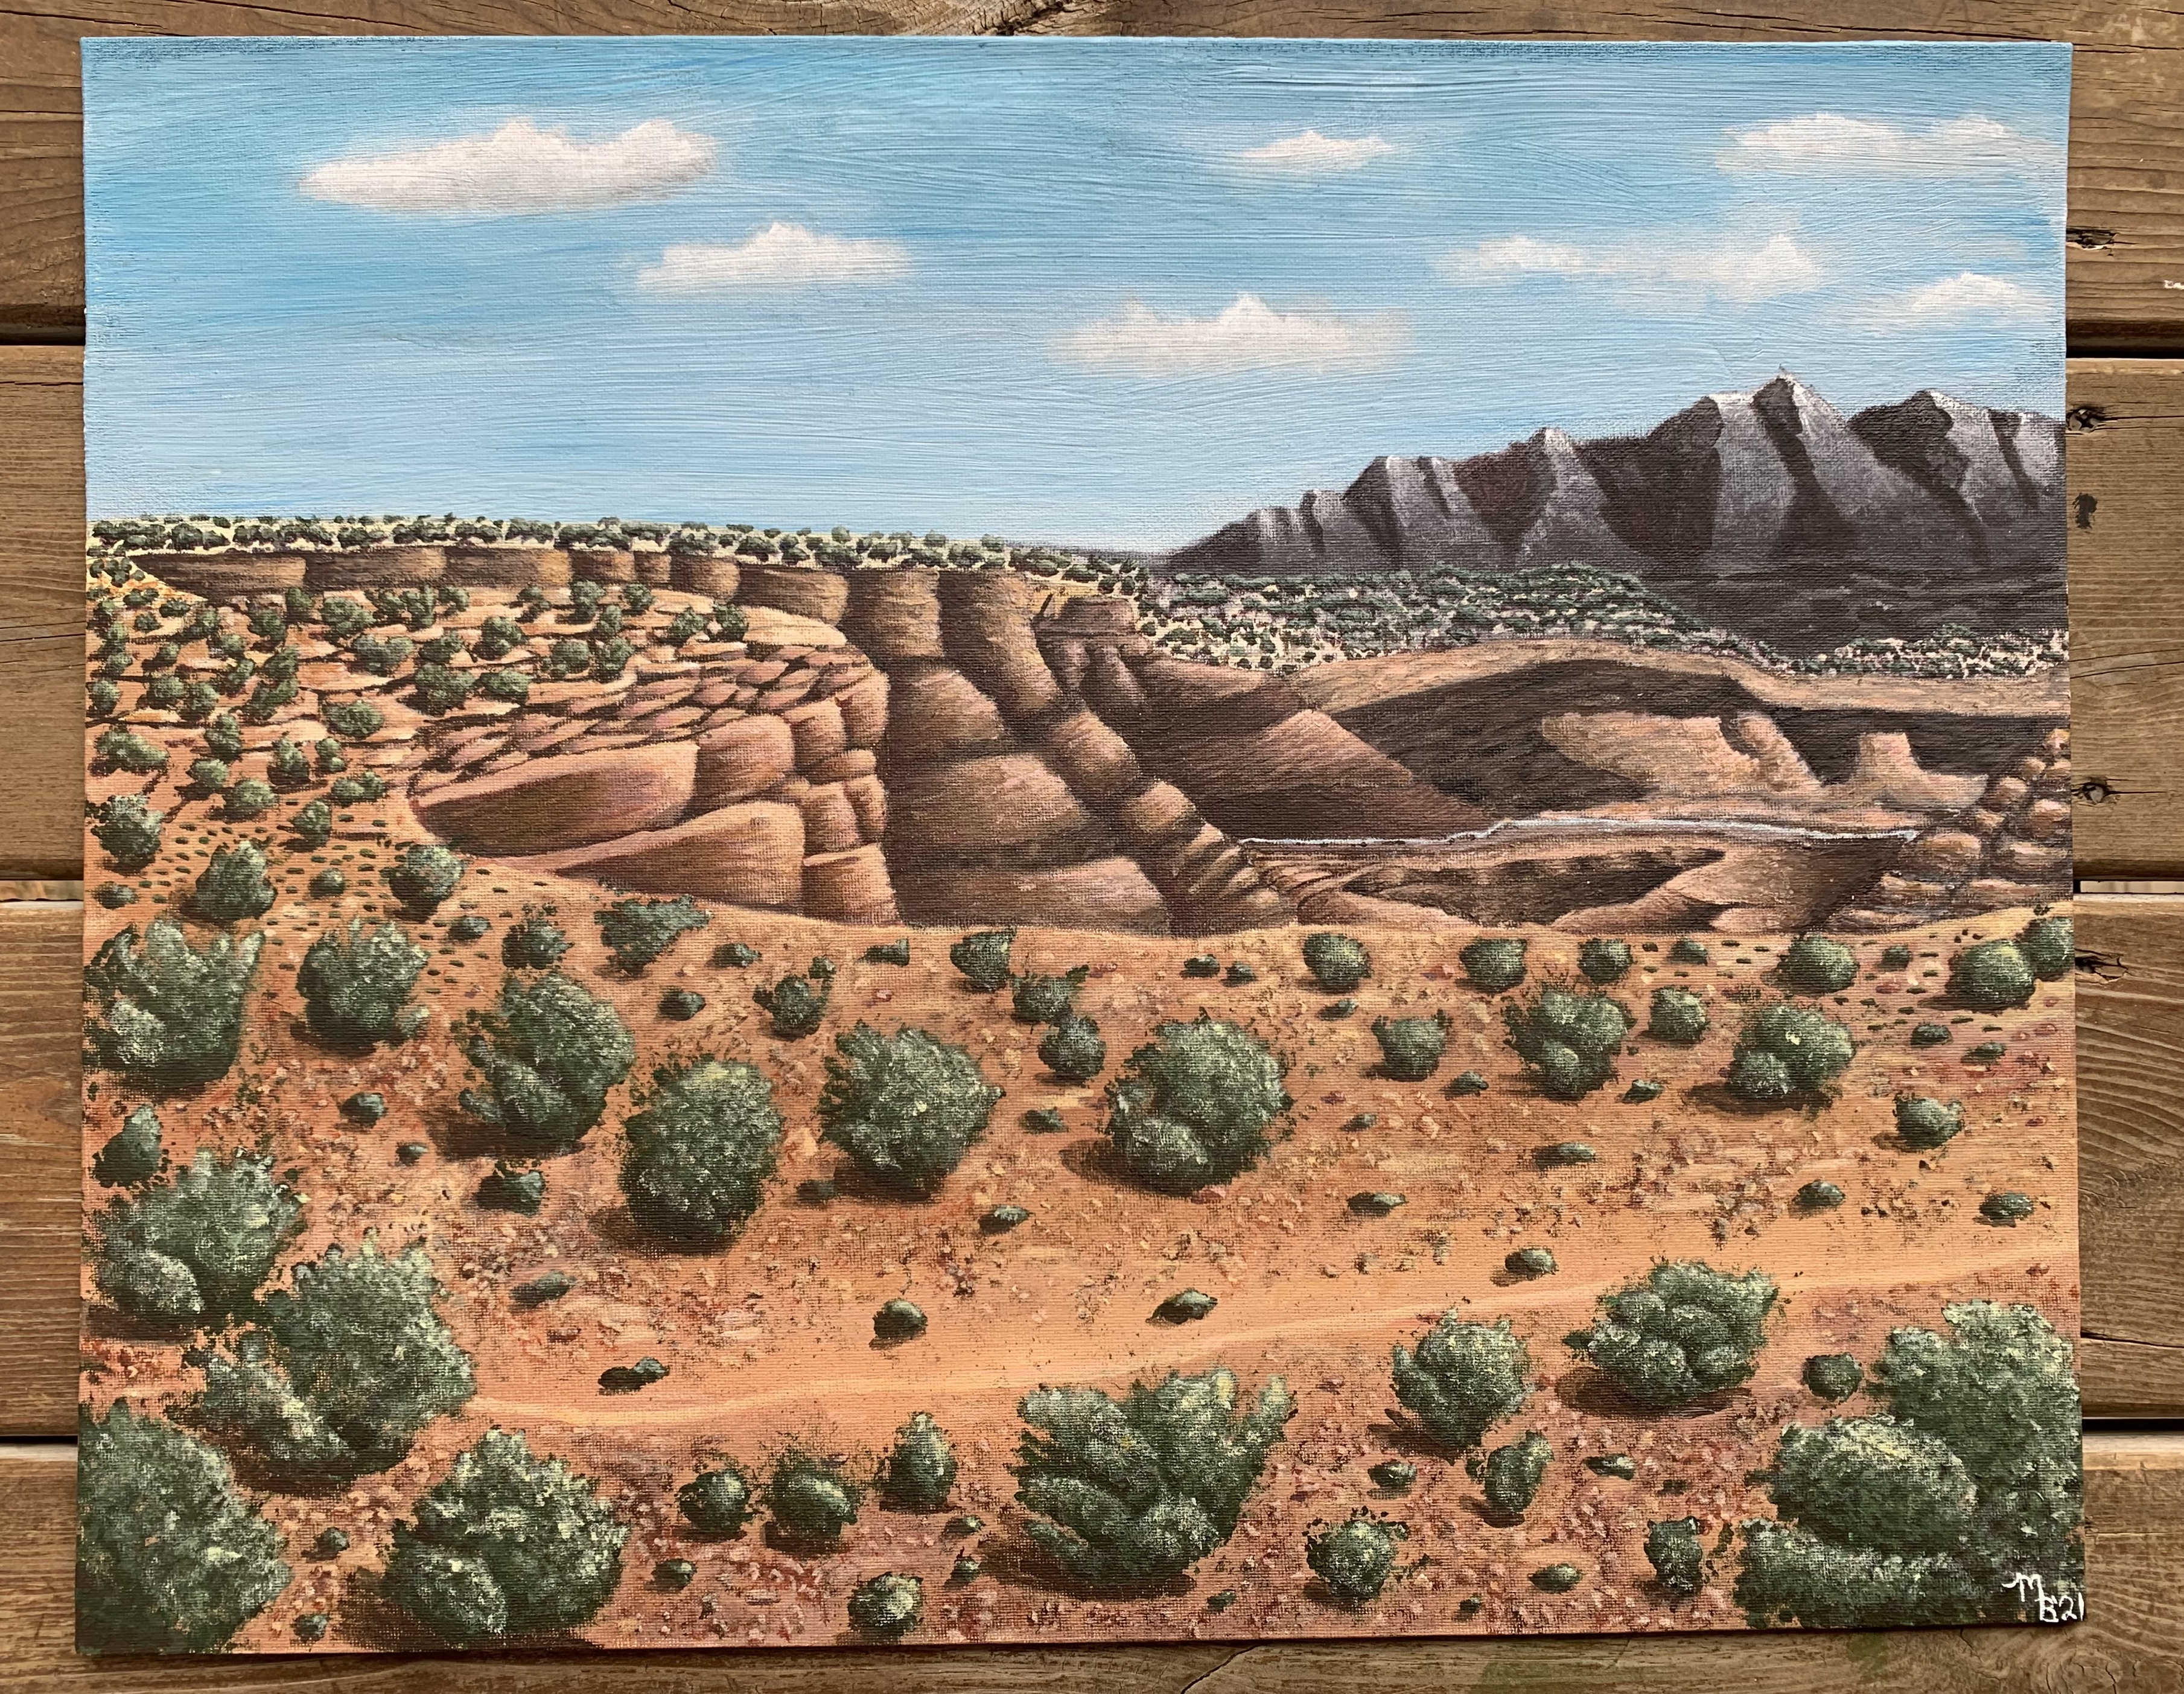 painting of desert landscape with cacti and rocks against a blue sky with clouds